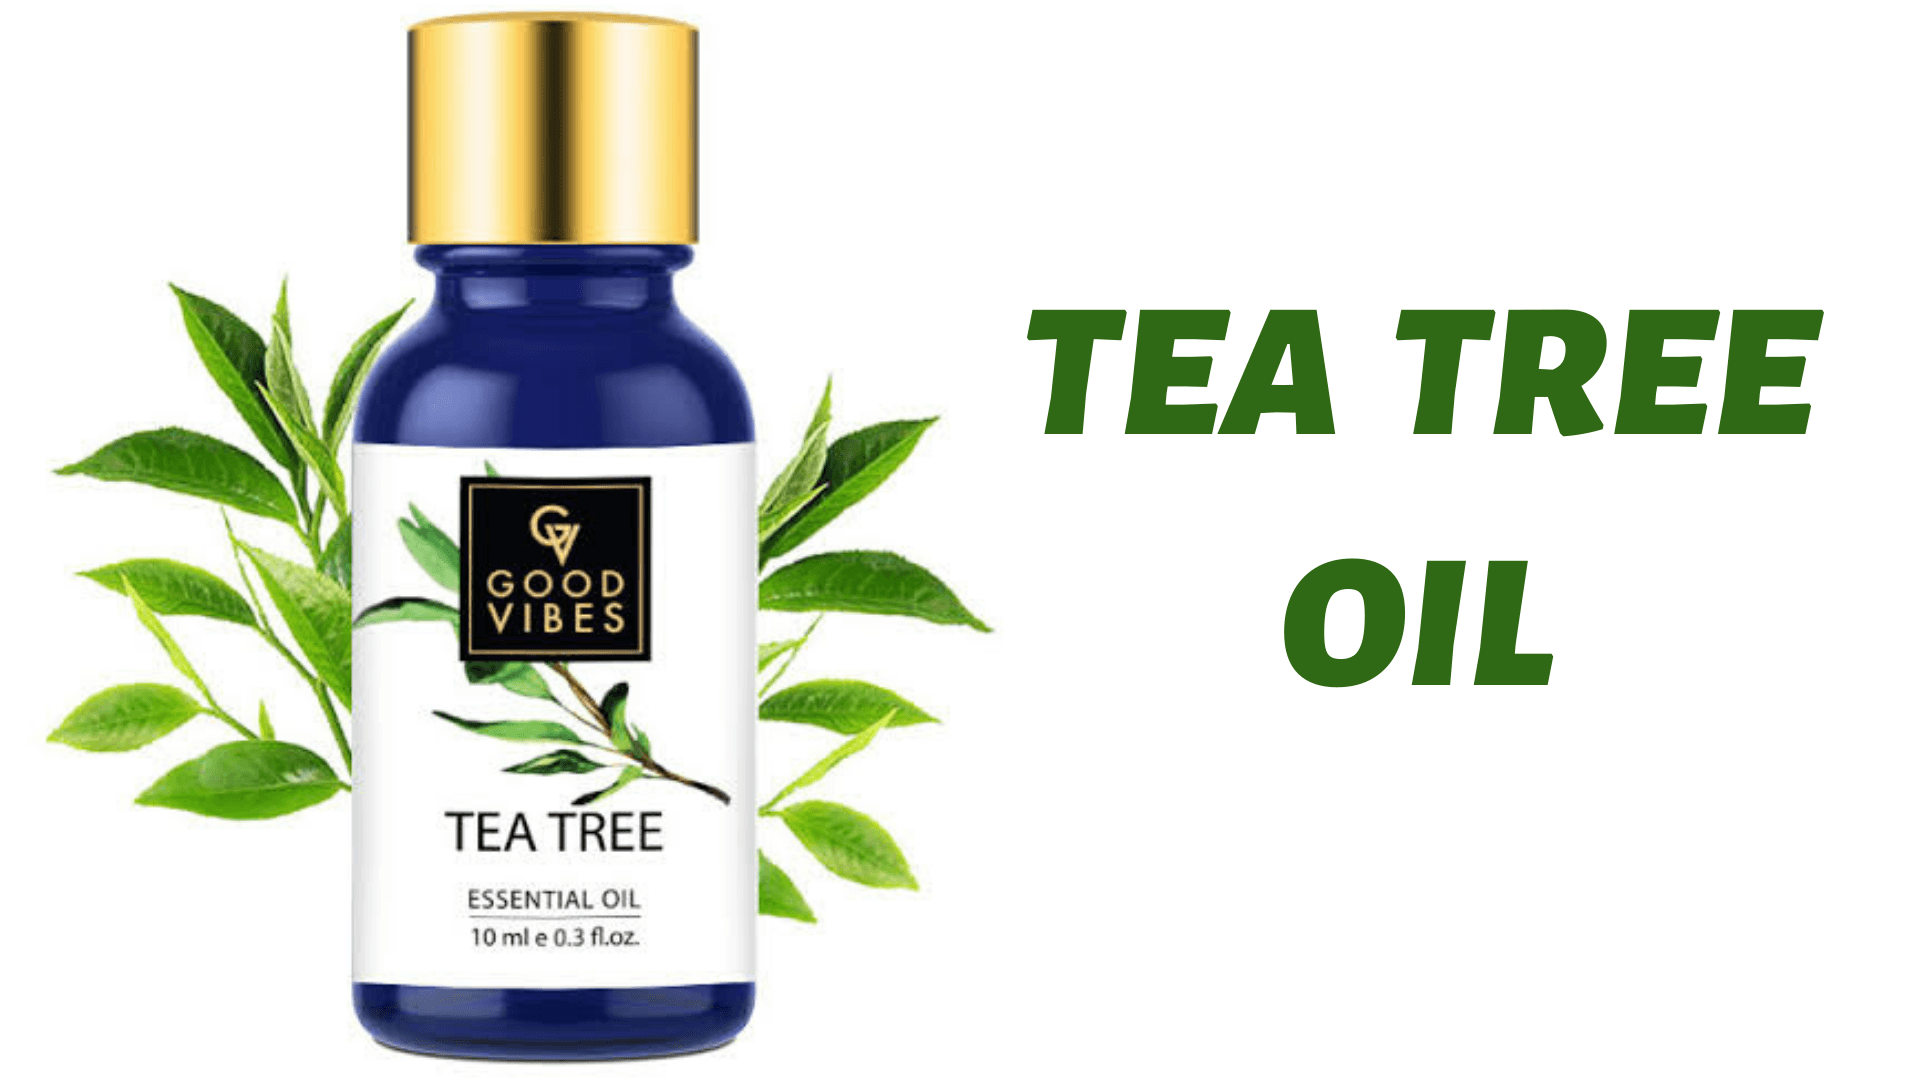 TEA TREE OIL One of the home remedies for open pores